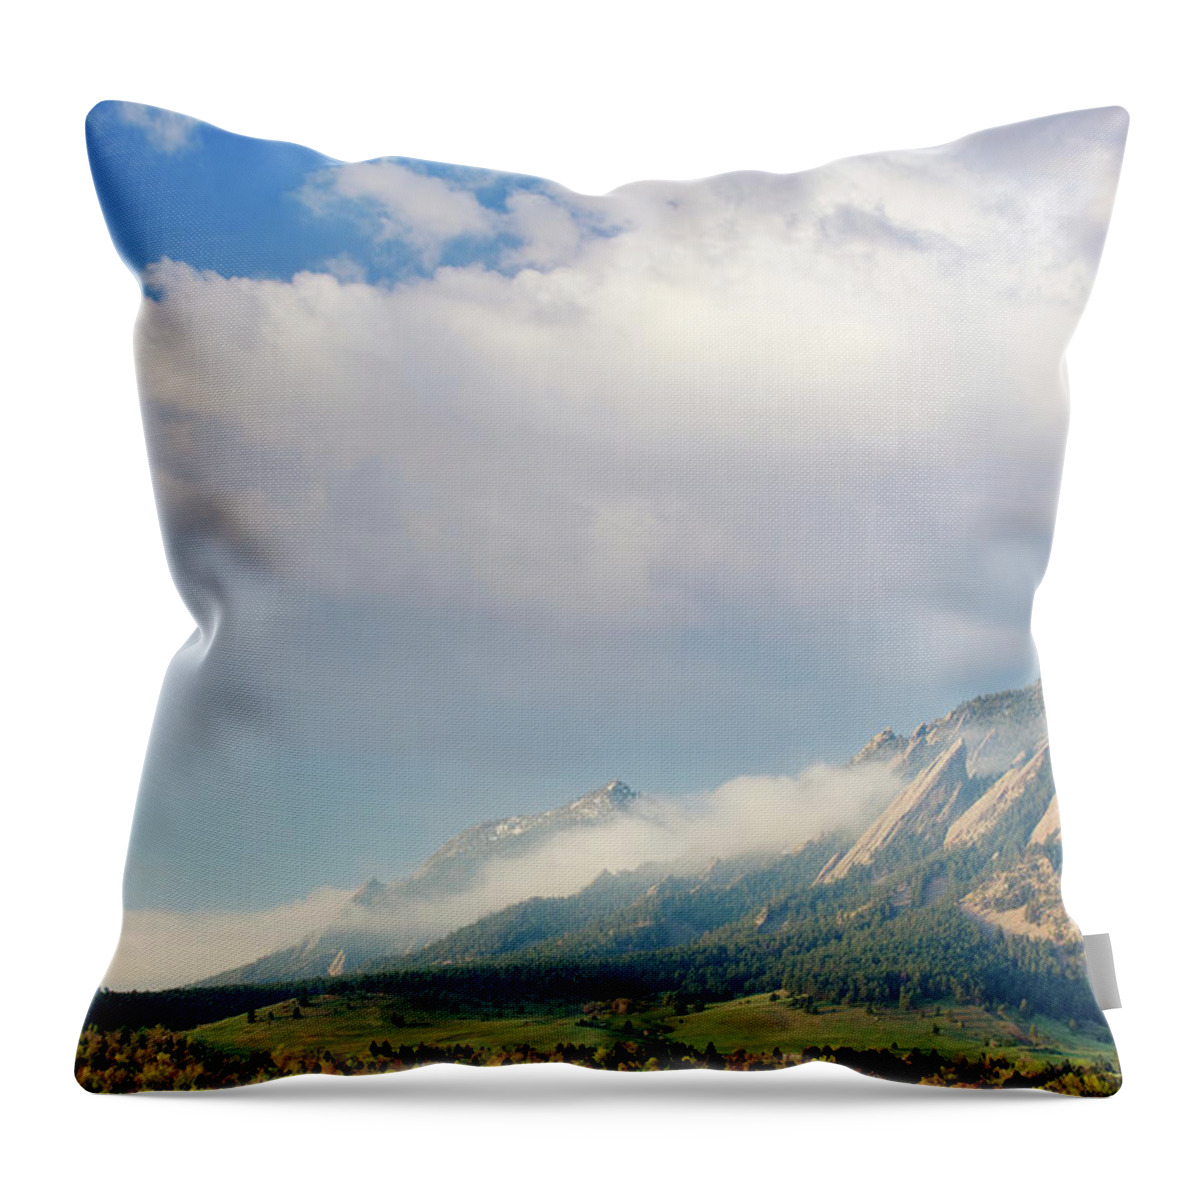 Scenics Throw Pillow featuring the photograph First Light On The Boulder Colorado #1 by Beklaus